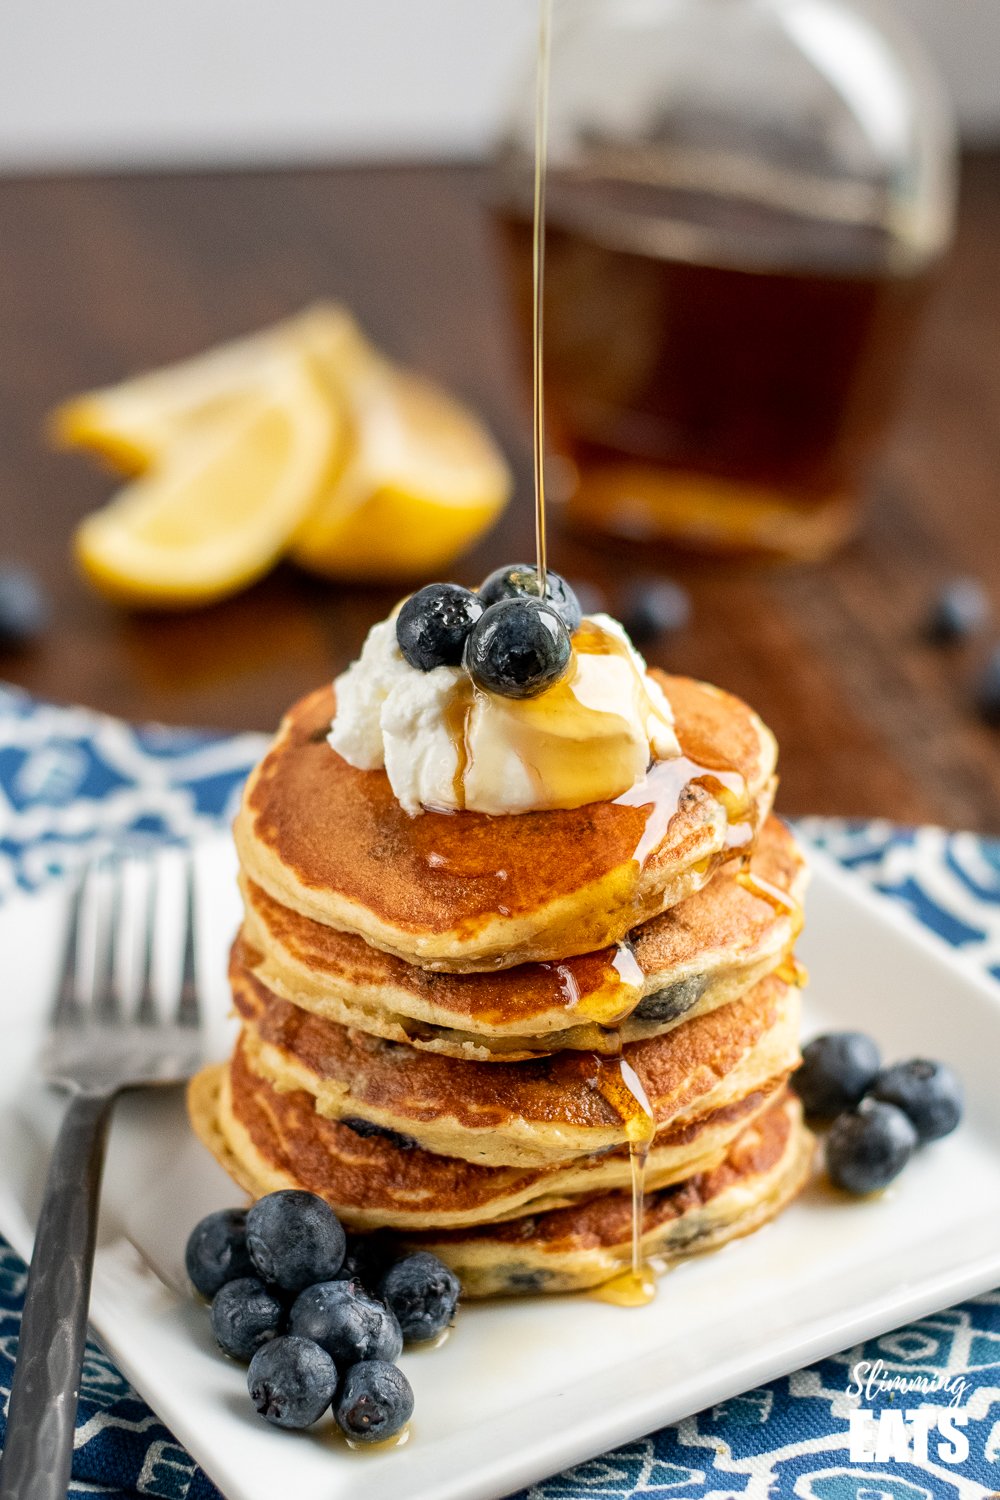 maple syrup being drizzled over lemon blueberry oat pancakes on a white plate